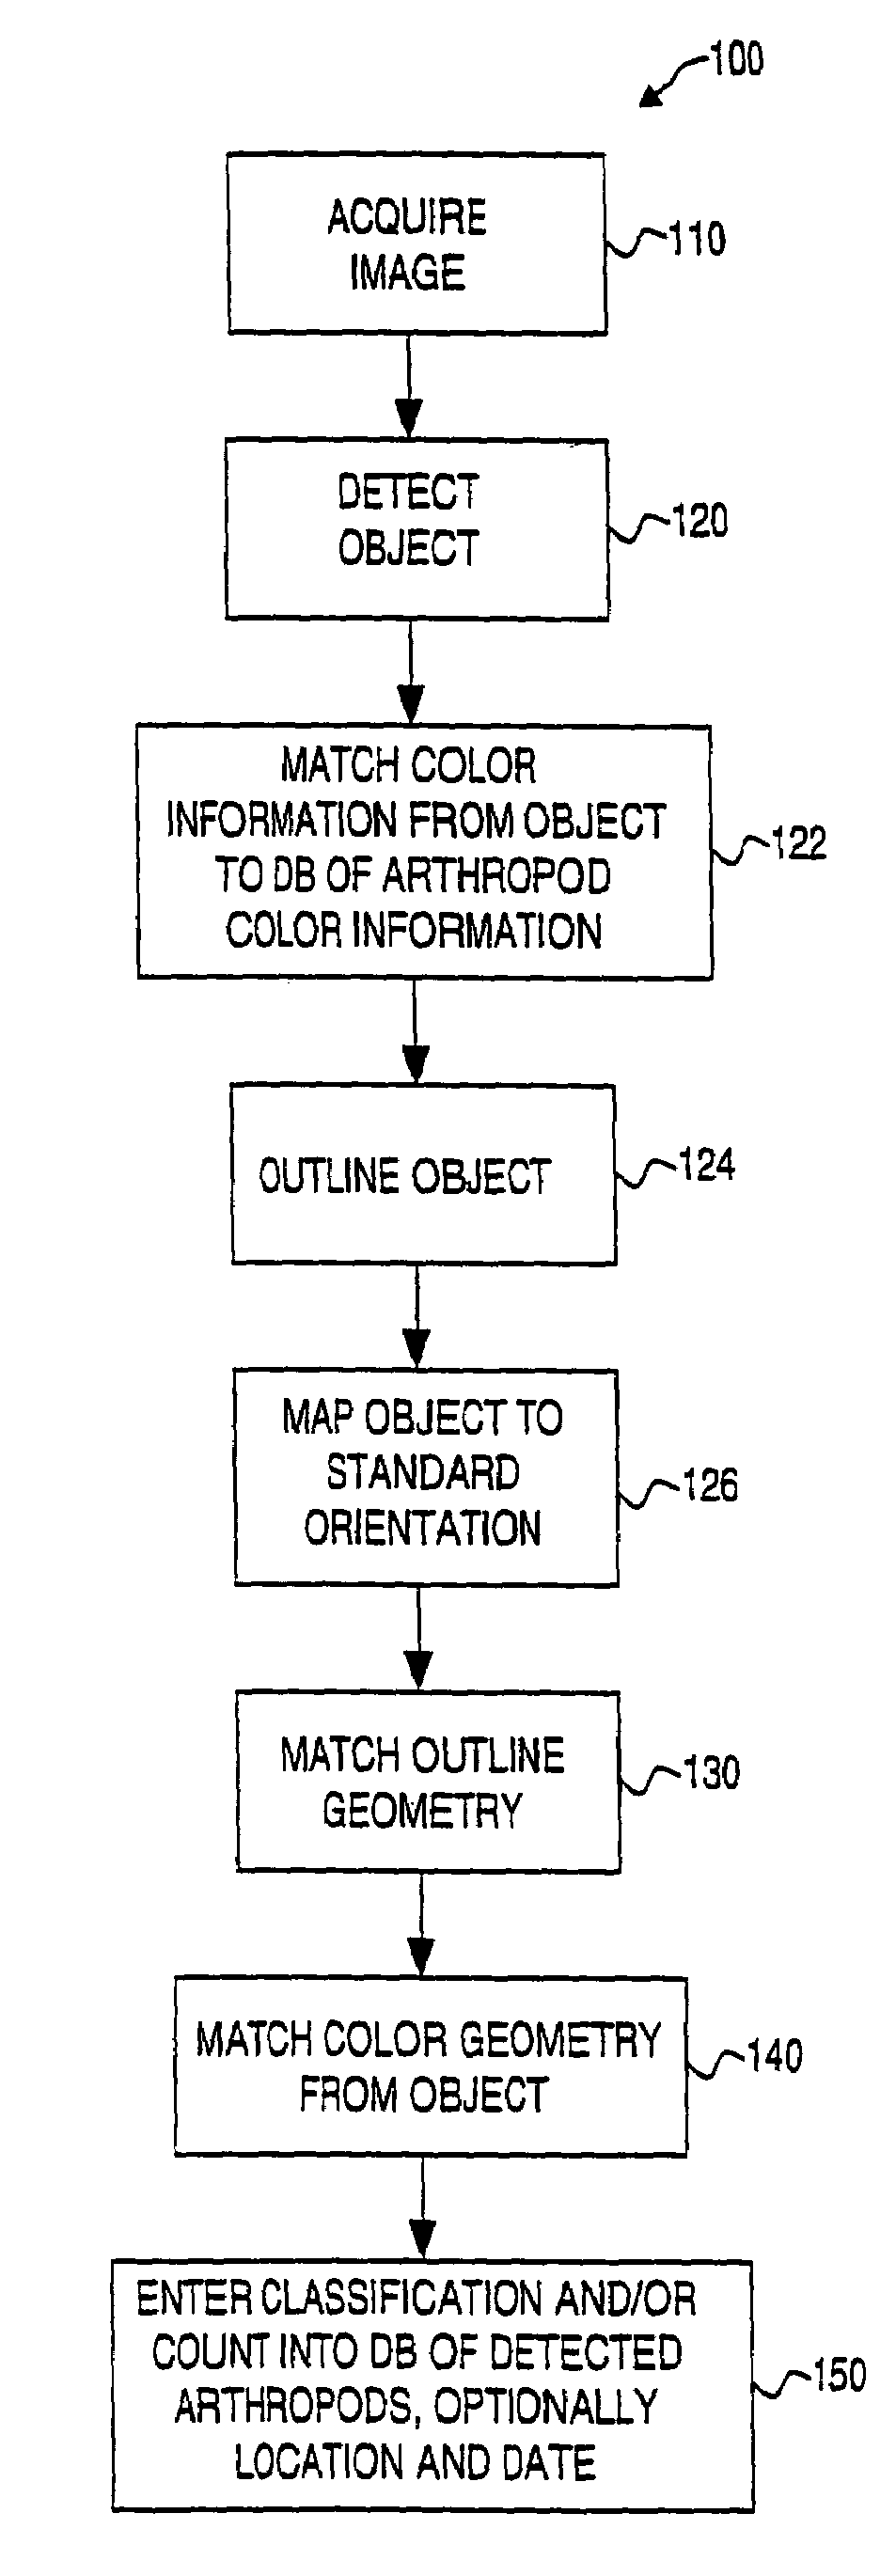 Method and system for detecting and classifying objects in images, such as insects and other arthropods